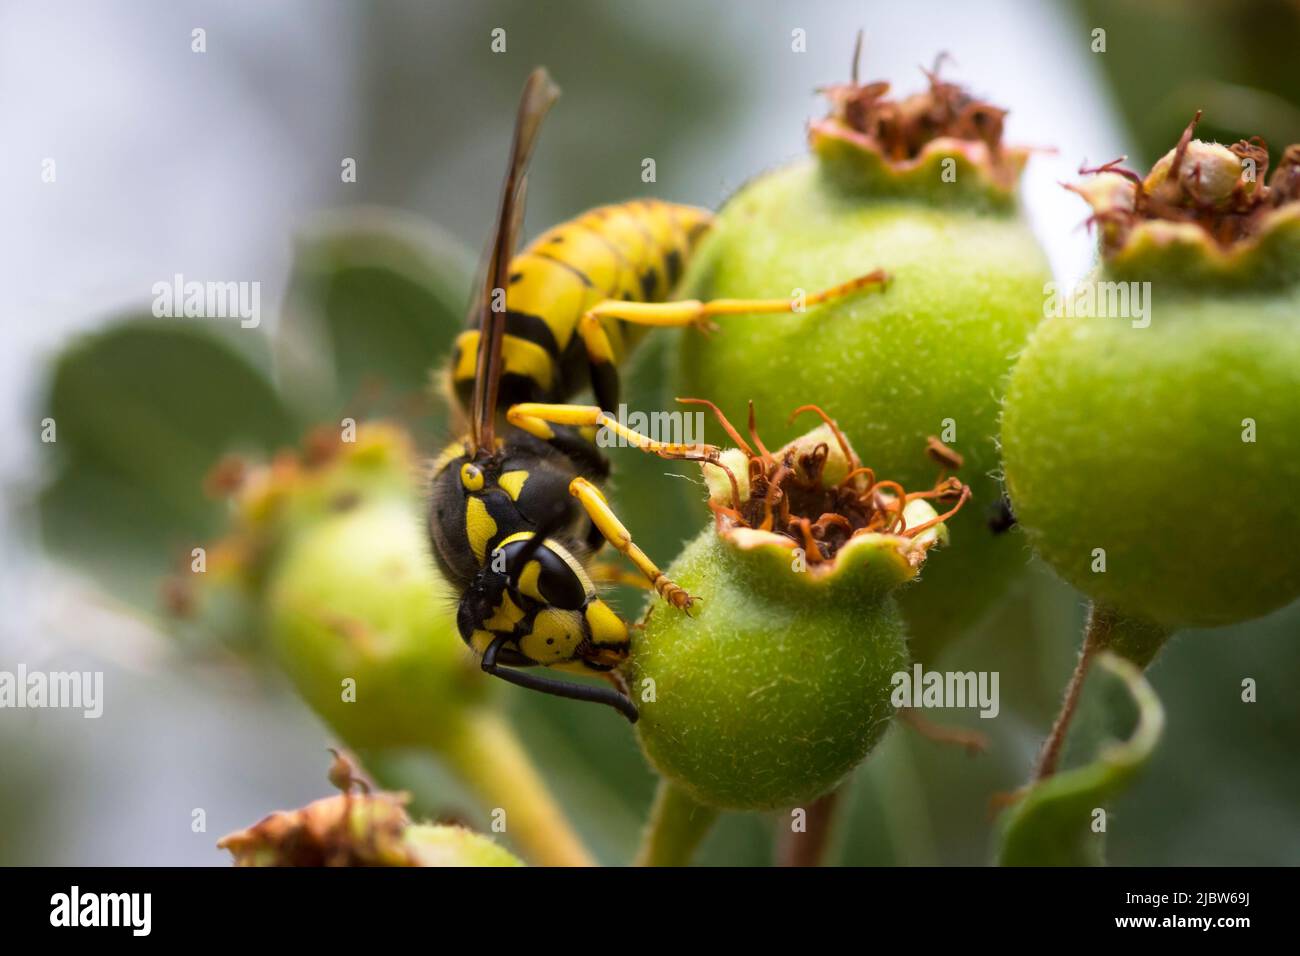 Close up of a German wasp (Vespula germanica) on unripe green hawthorn berries Stock Photo